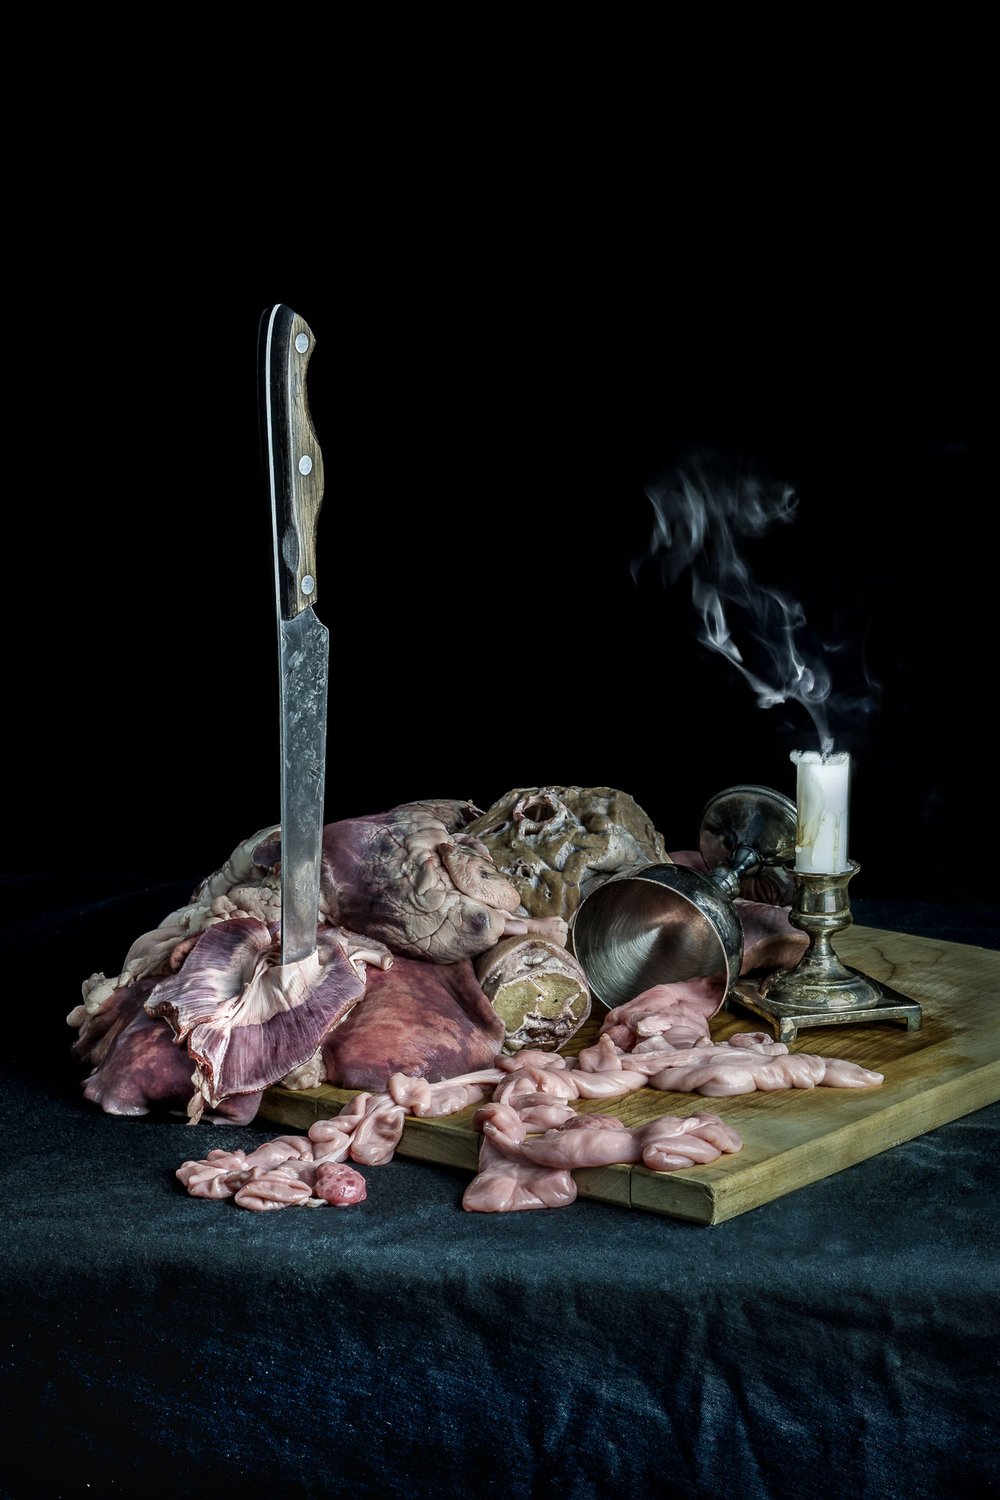 neal-auch-meat-photo-cover-art-web-3.jpg